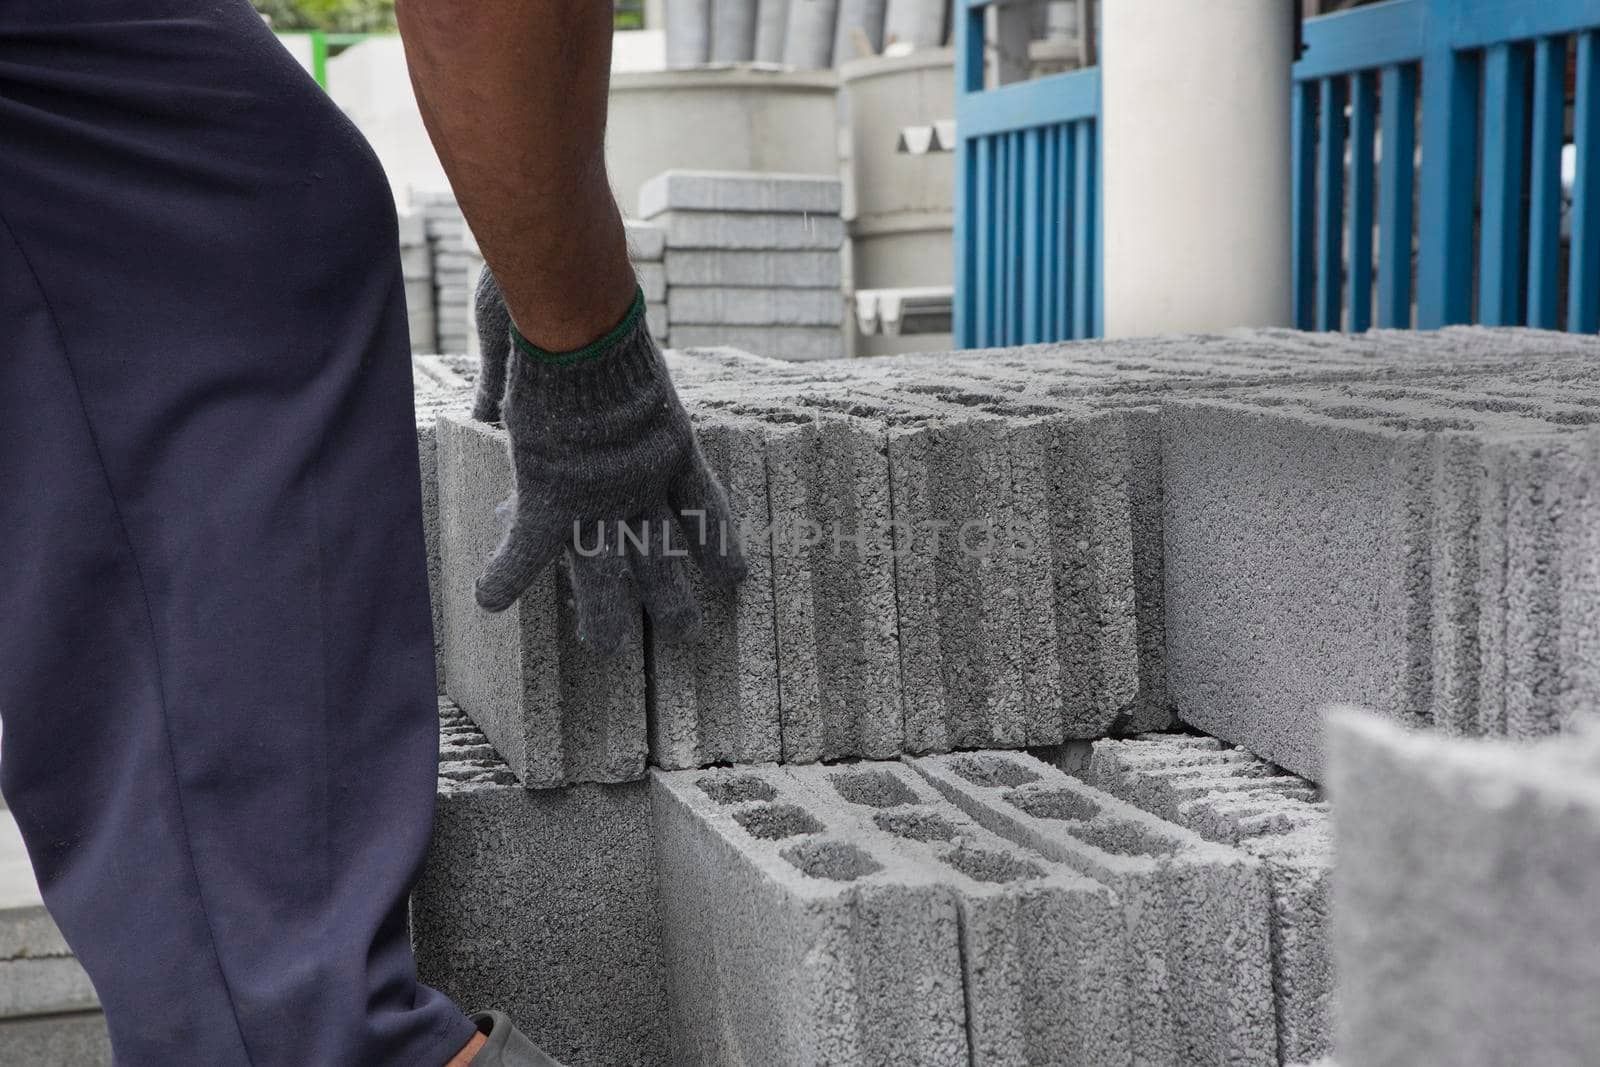 Bricks used in the construction by titipong